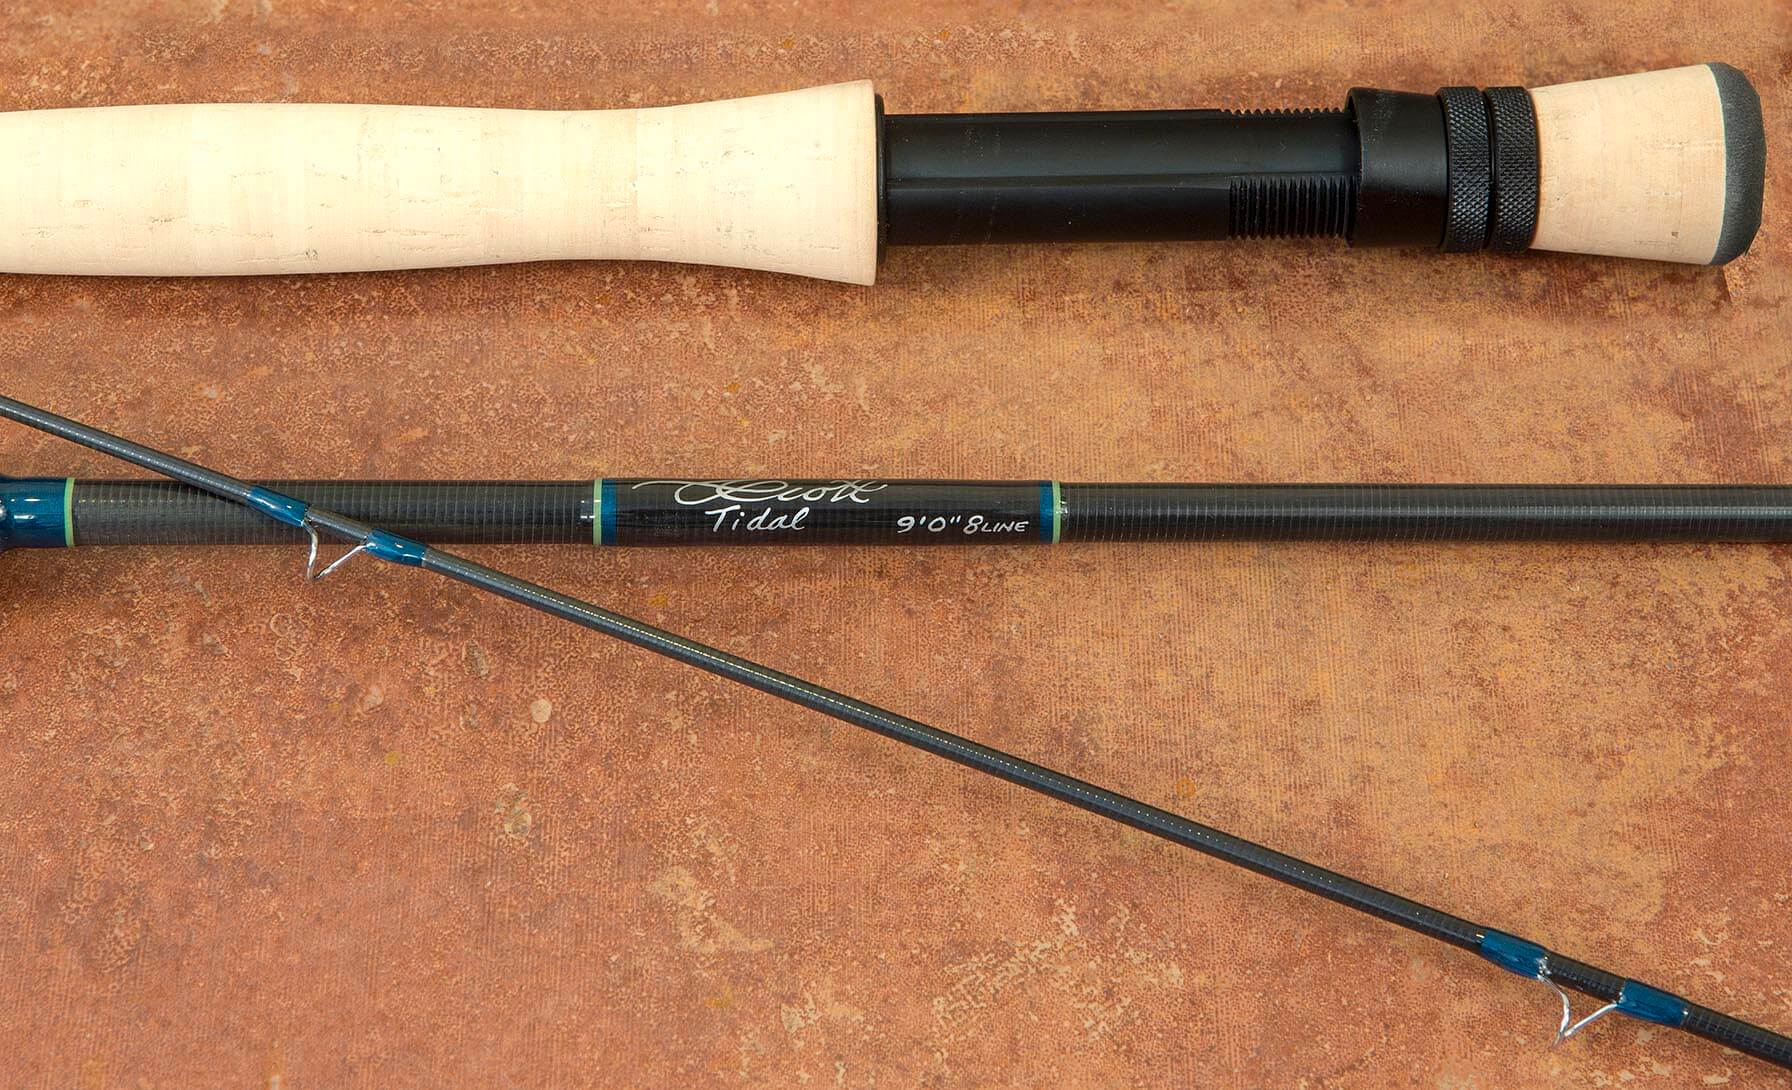 A serious saltwater fly rod for a reasonable price, the Scott Tidal is a proven performer in hard core saltwater situations.